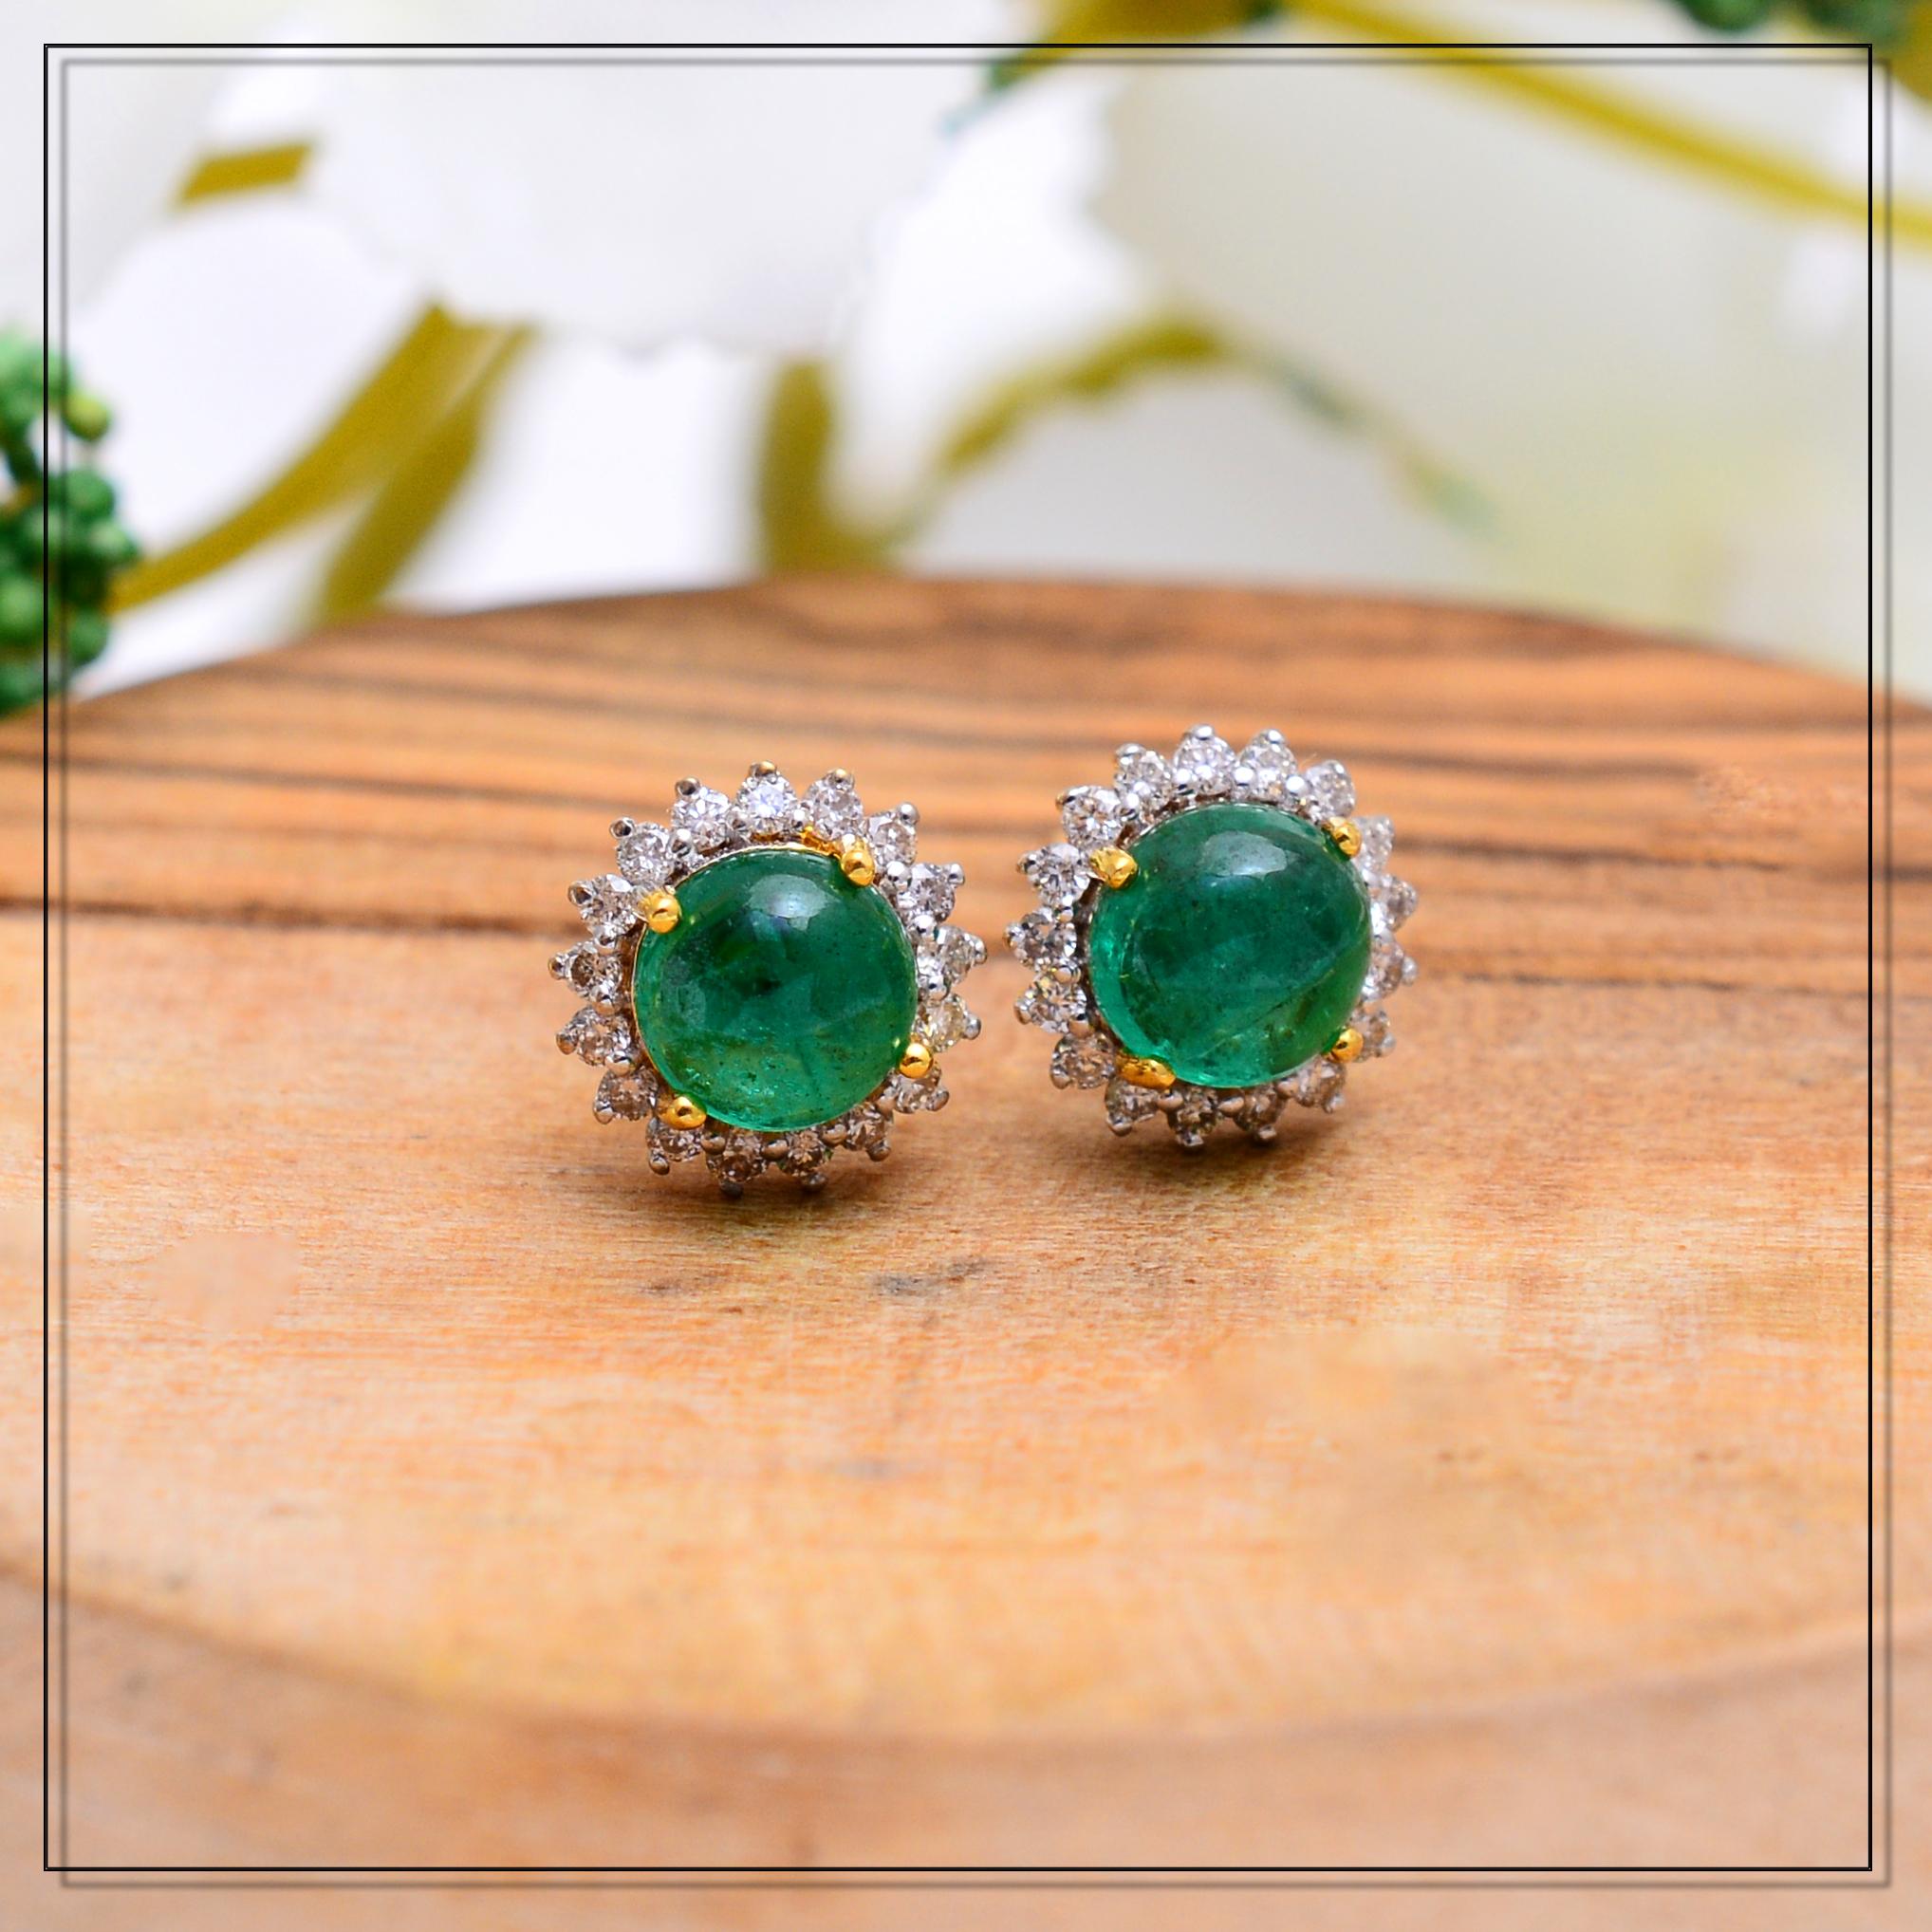 Brilliant Cut Emerald Stud Earrings with Diamond in 14k Gold For Sale